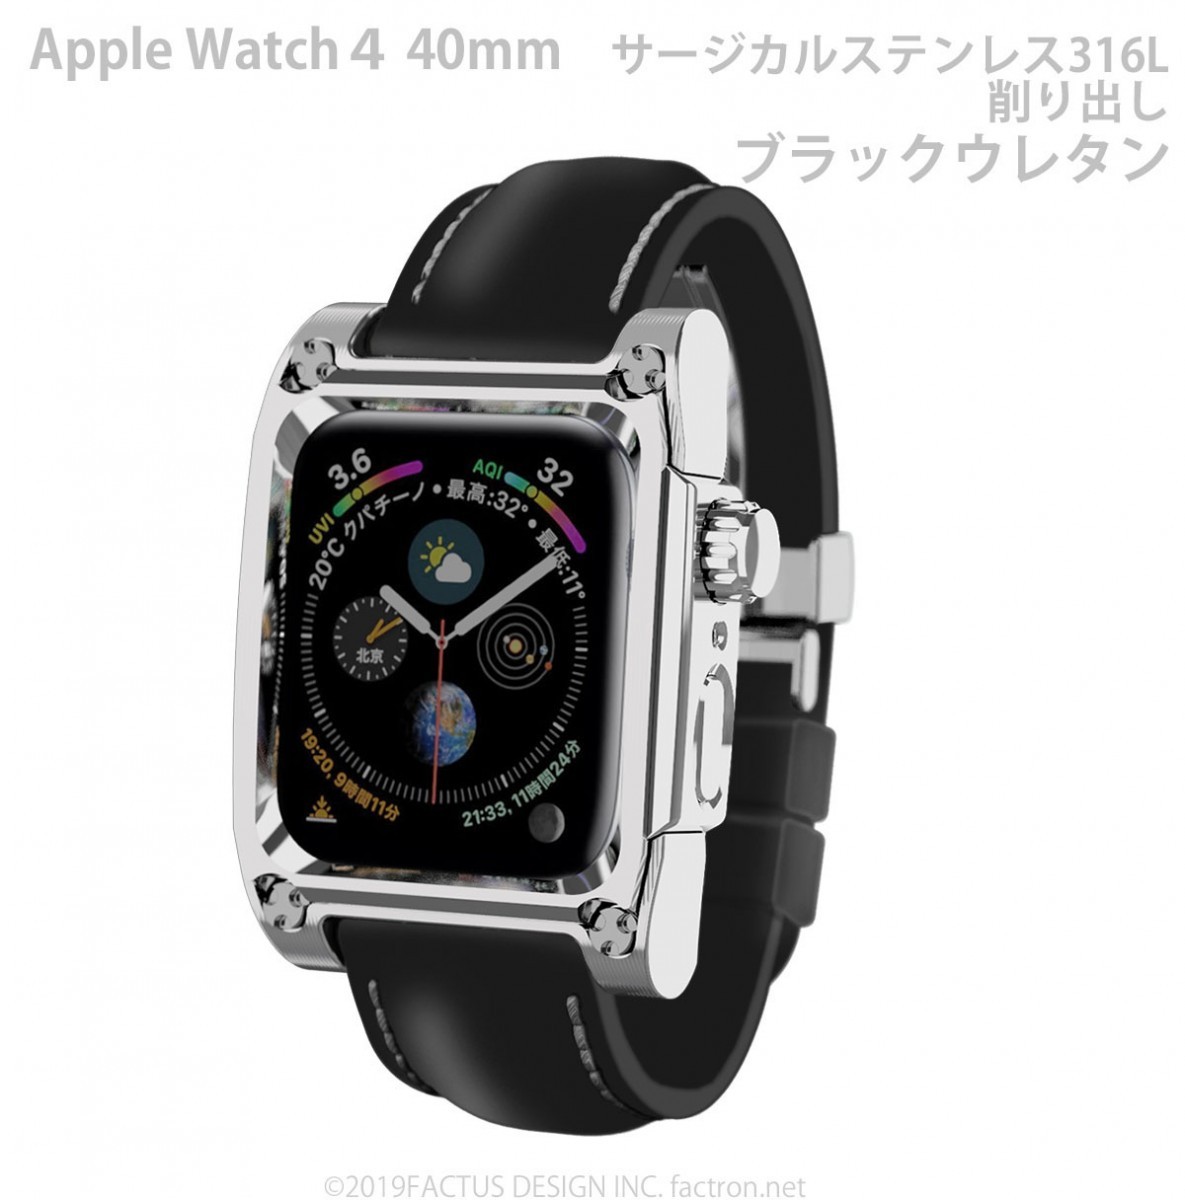  Apple watch 4&amp;5 for Novel for AppleWatch4 surgical stainless steel 316L case black urethane band Series4&amp;5 40mm exclusive use FA-W-027